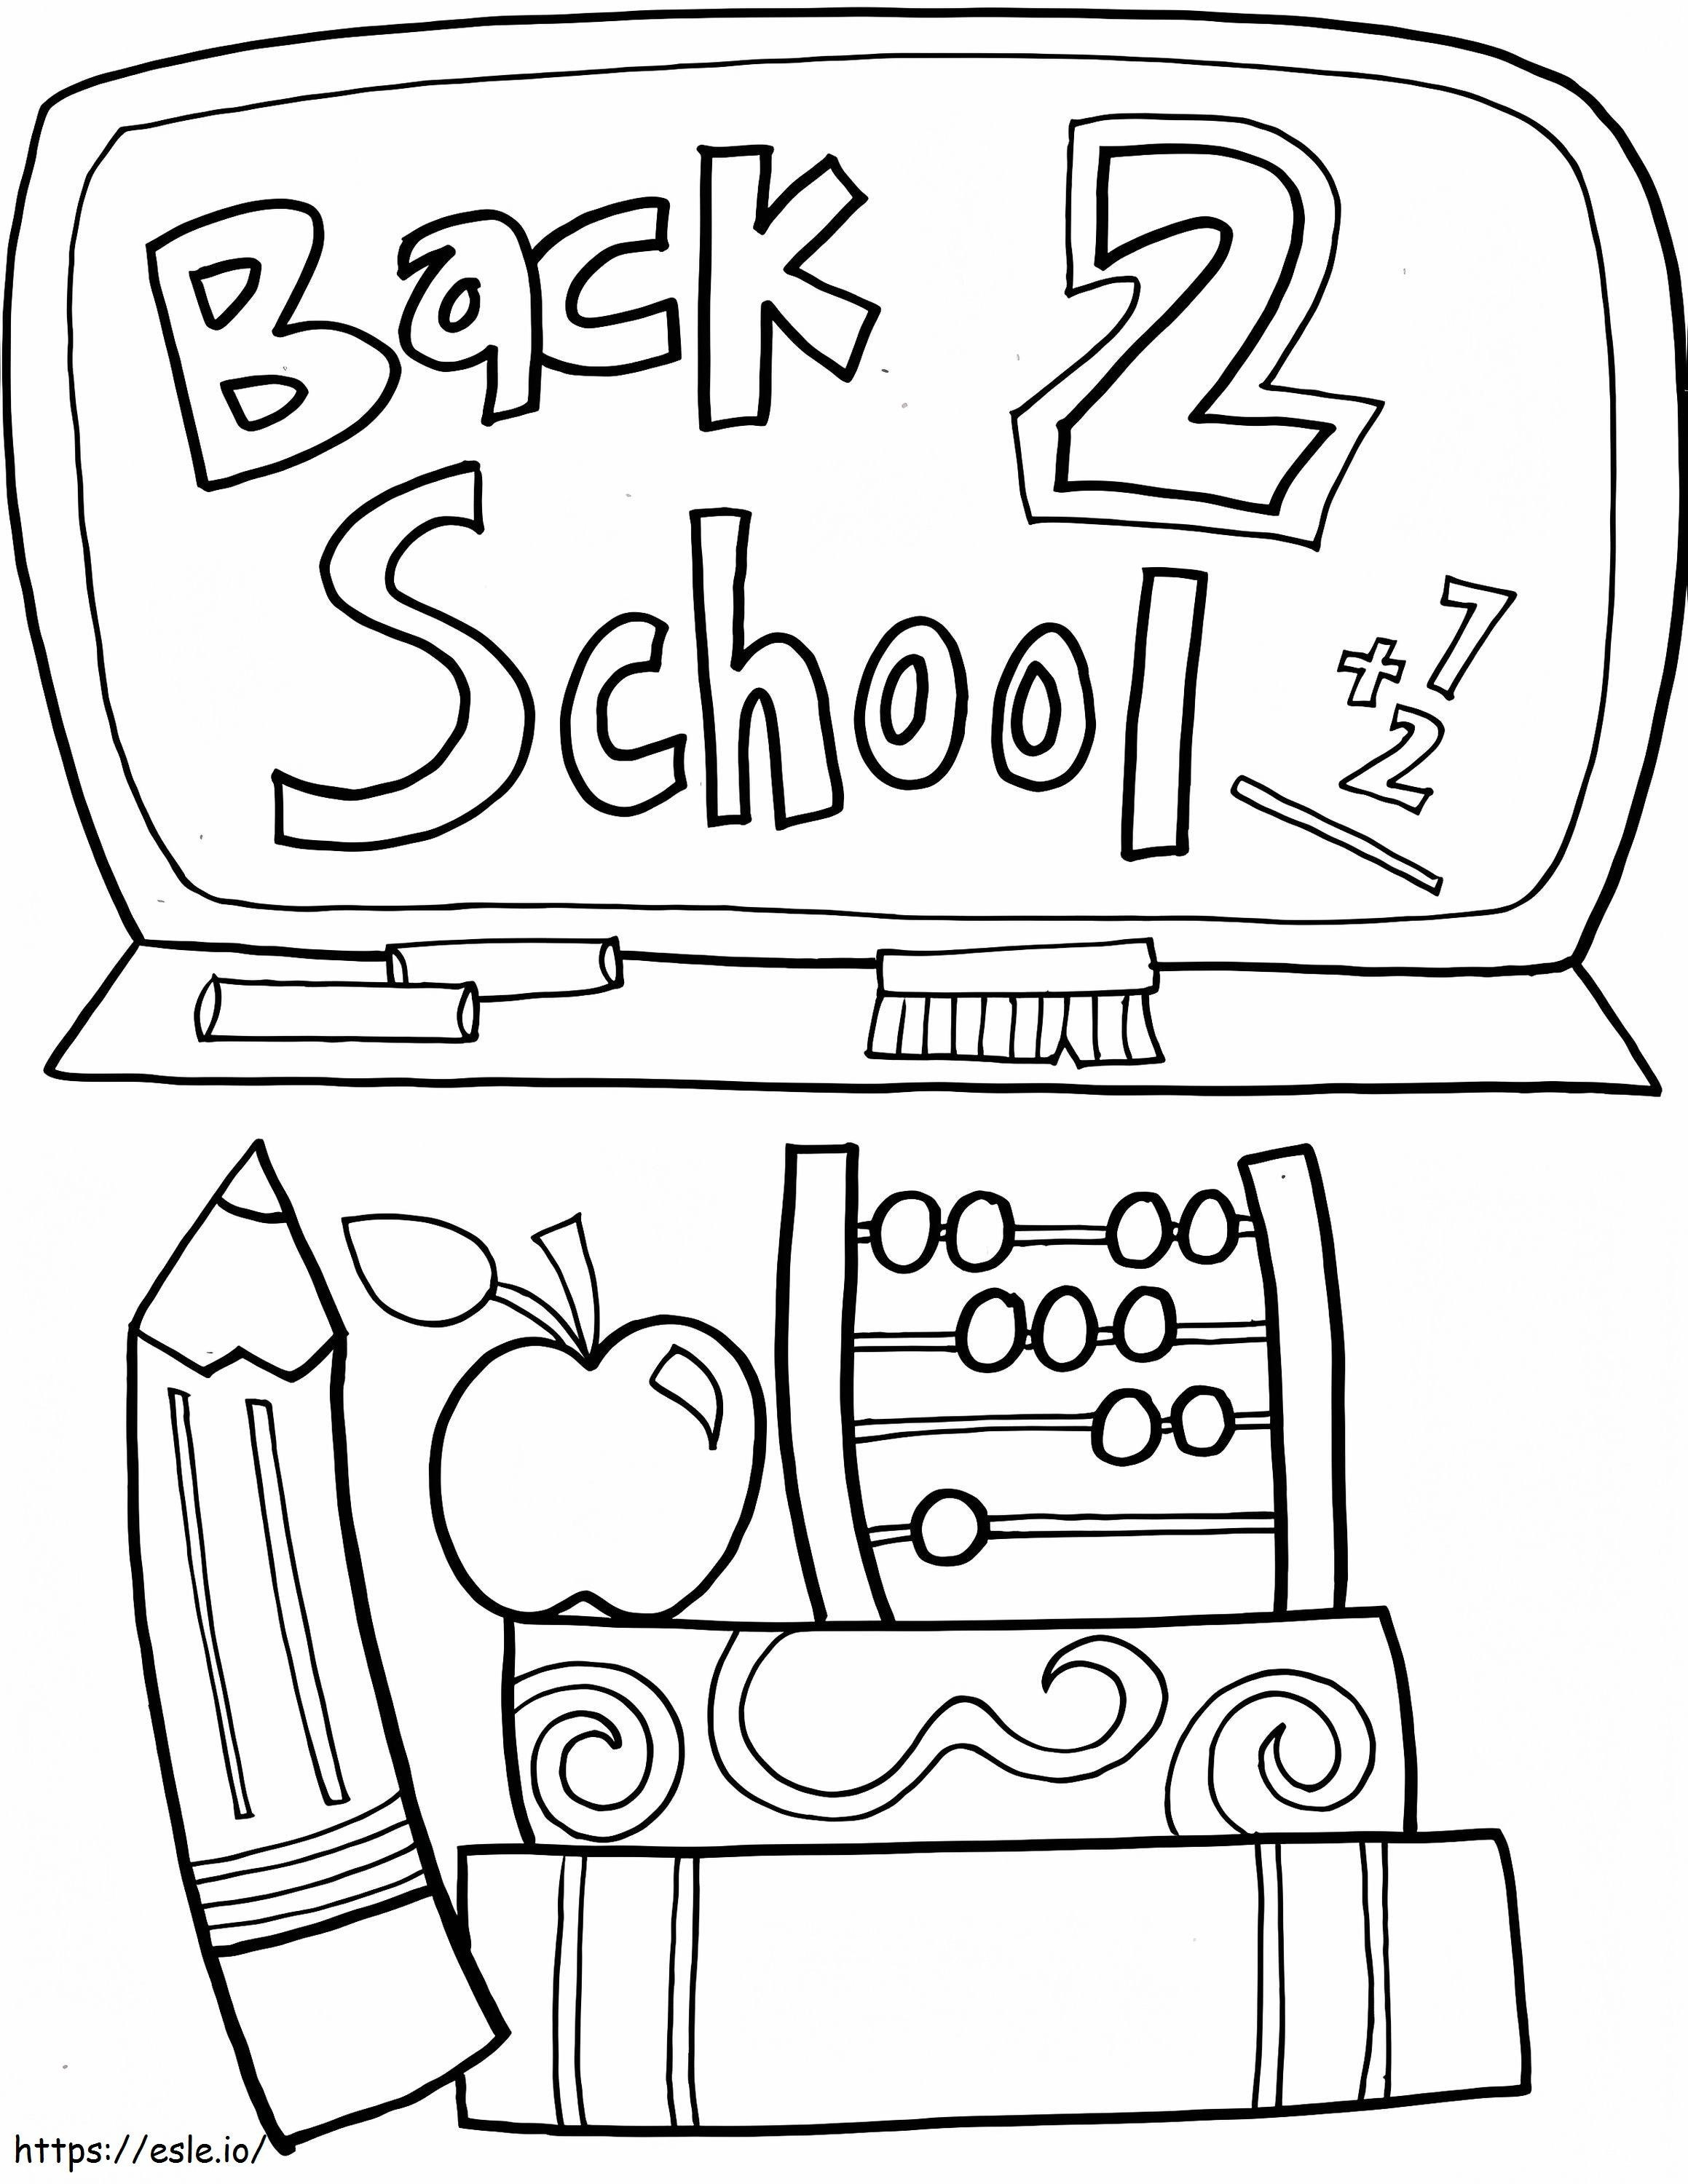 Back To Basic School coloring page